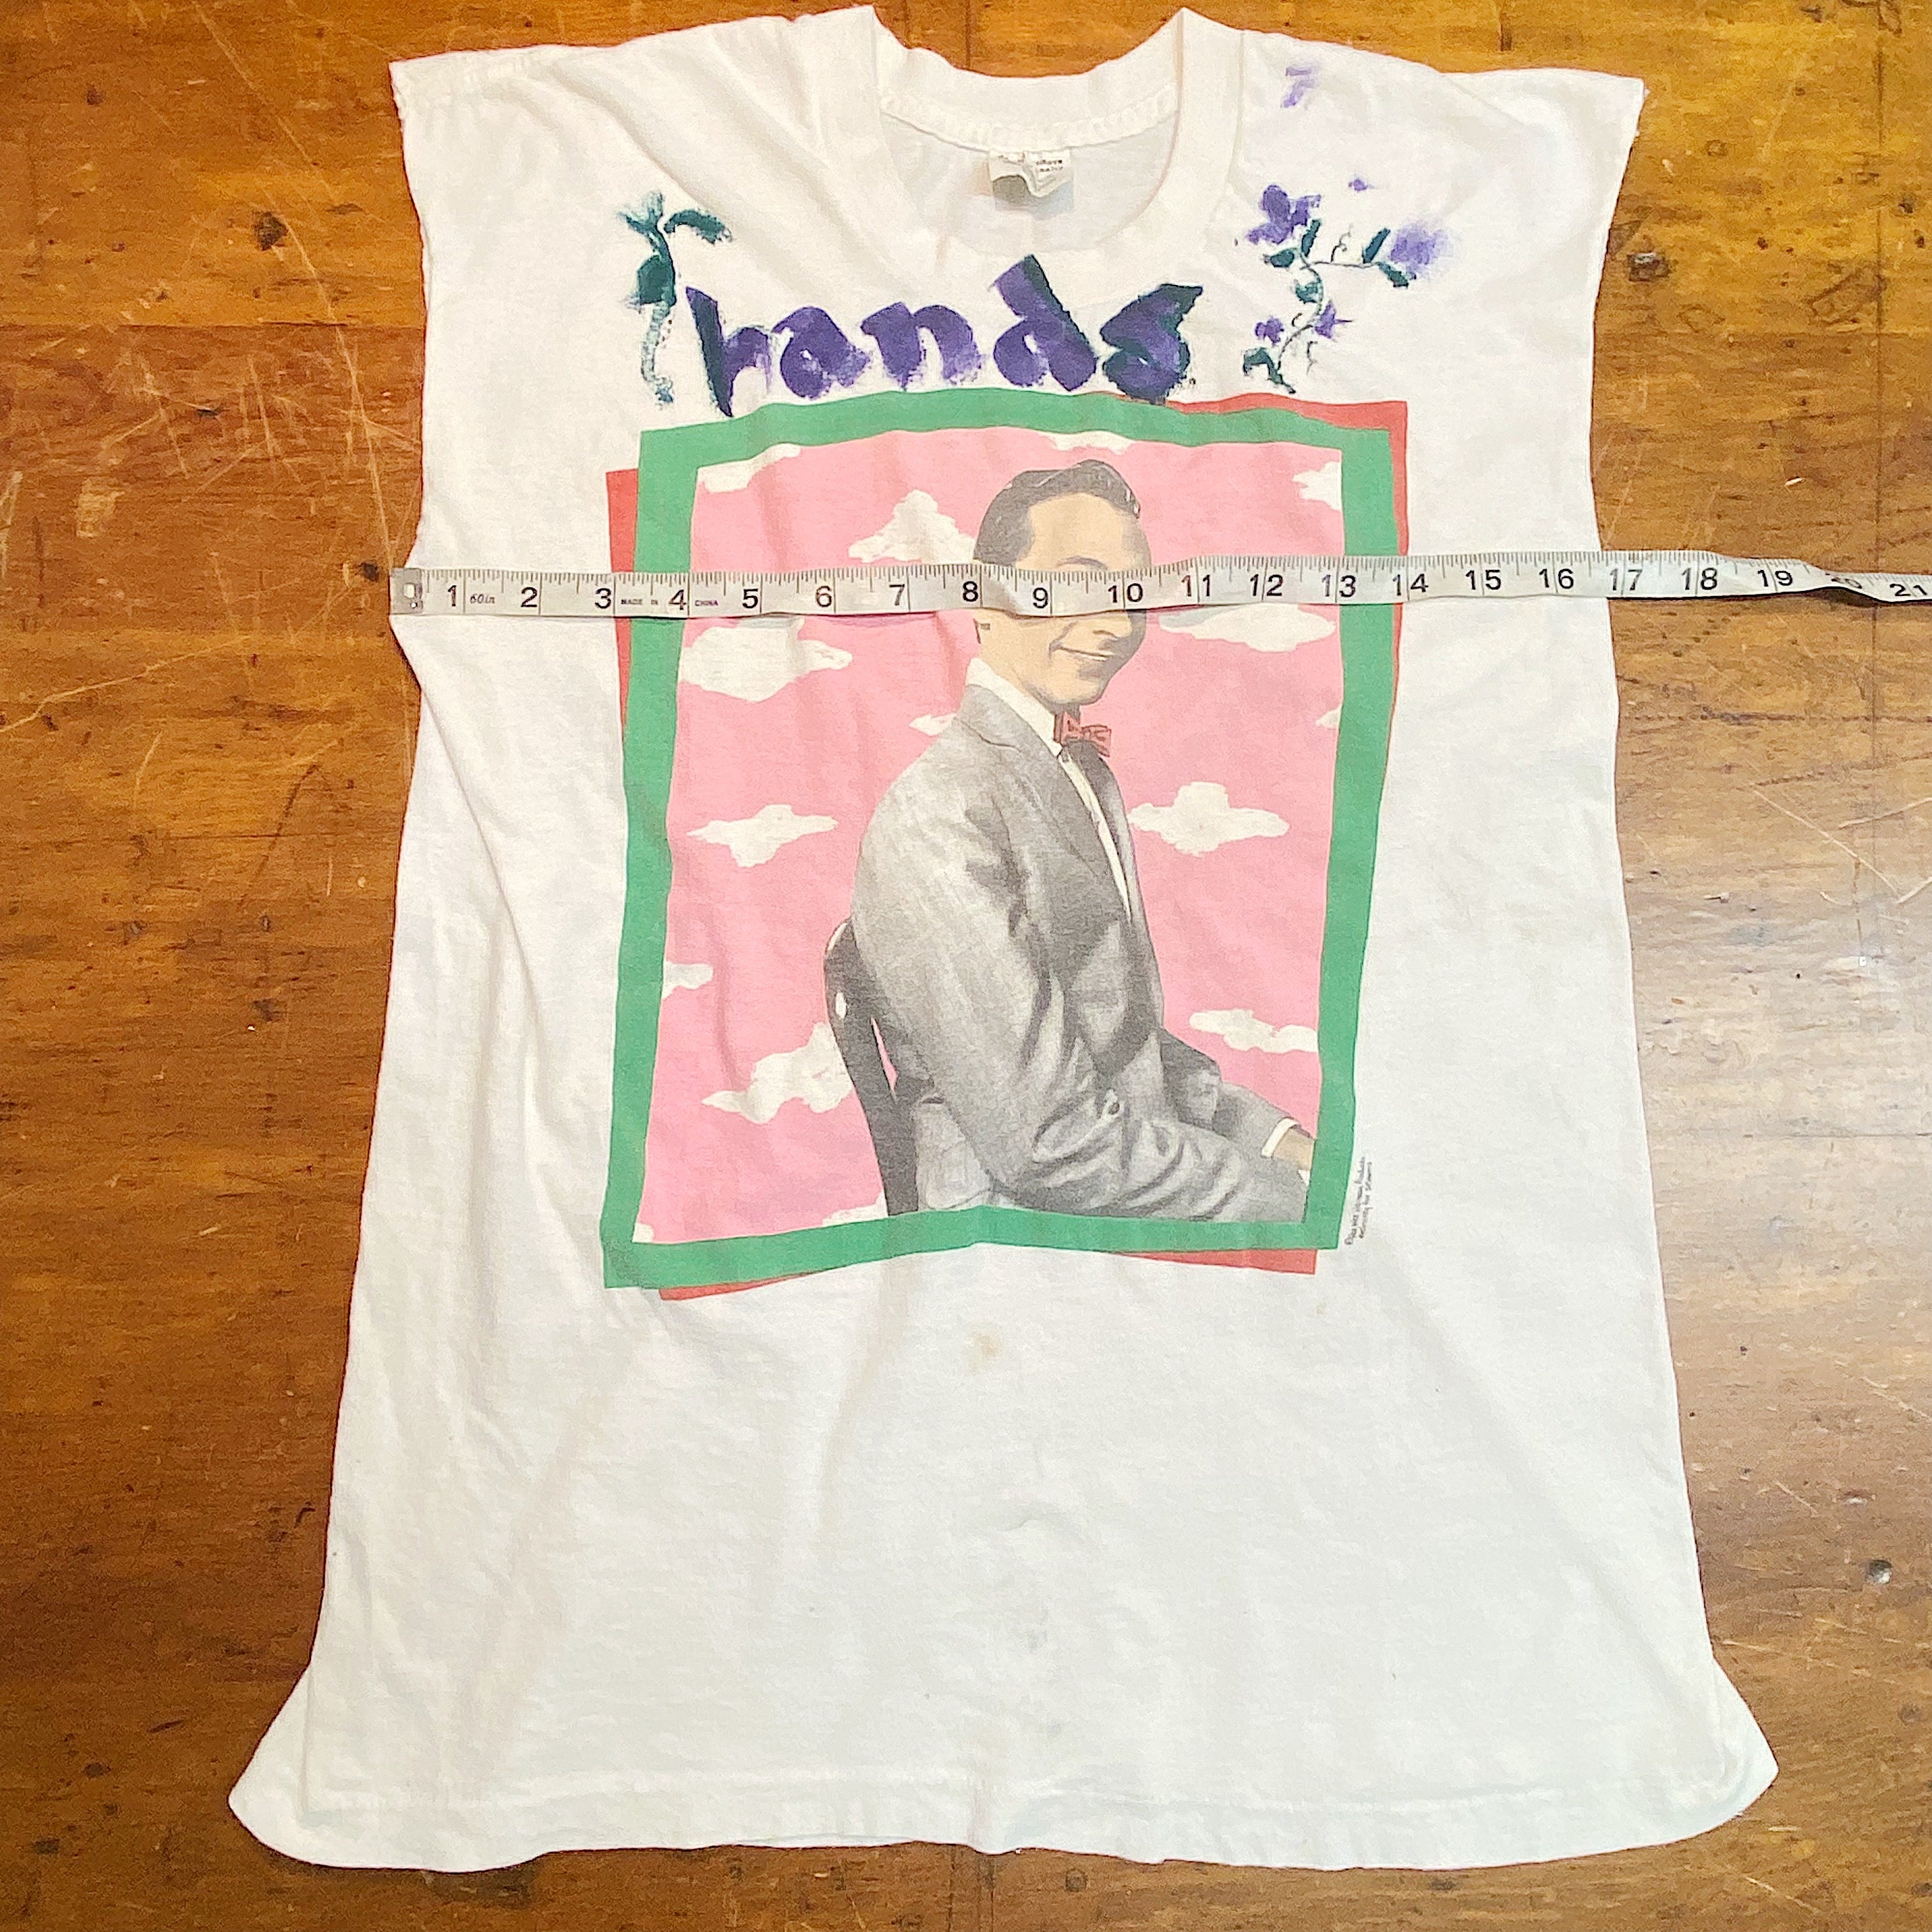 1980s Peewee Herman T-Shirt with Hand Painting "Hands" | DeSantis